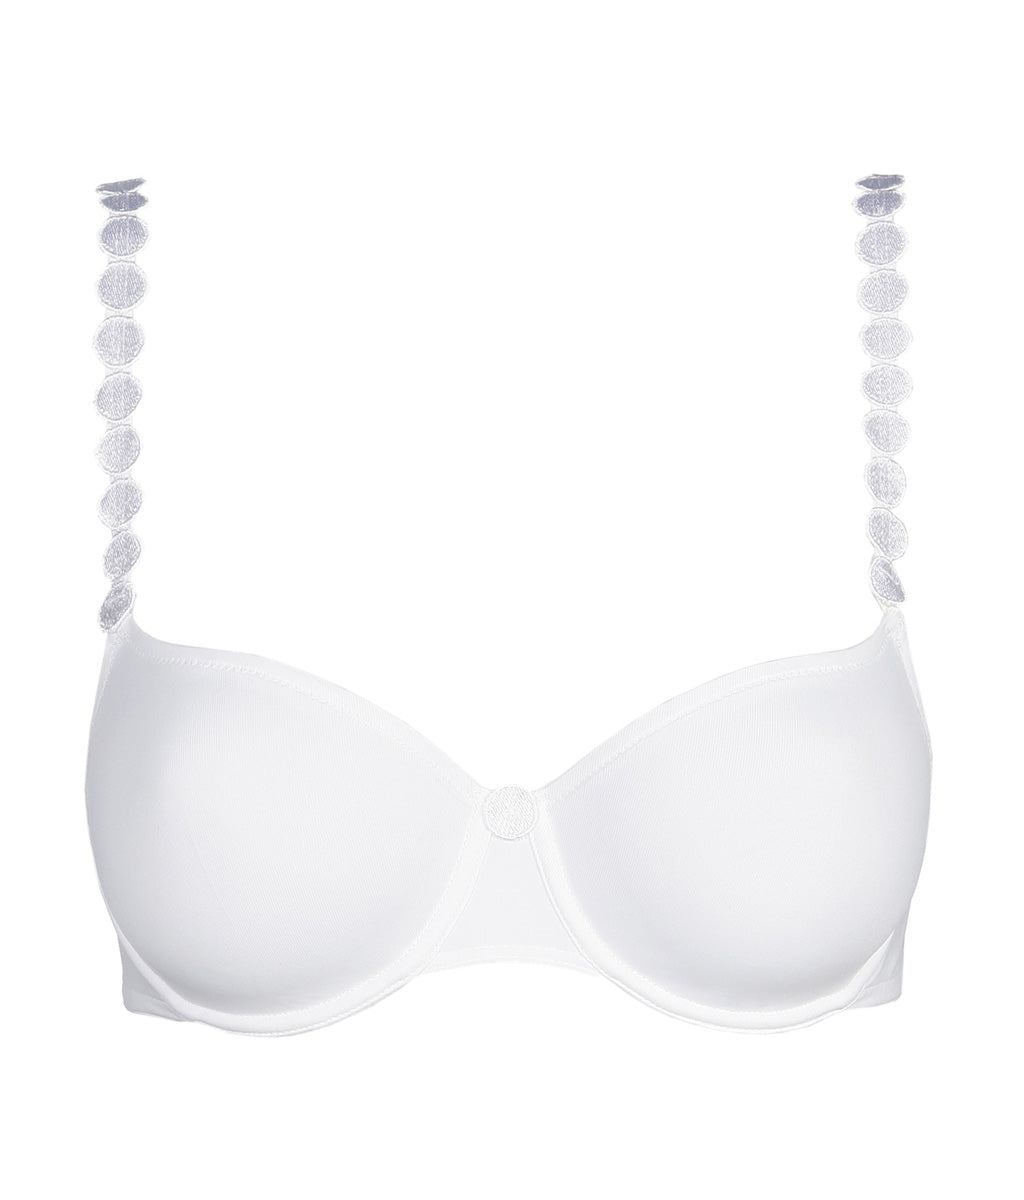 L'Aventure 'Tom' (White) Moulded Multiway Full Cup Bra BC - Sandra Dee - Product Shot - Front